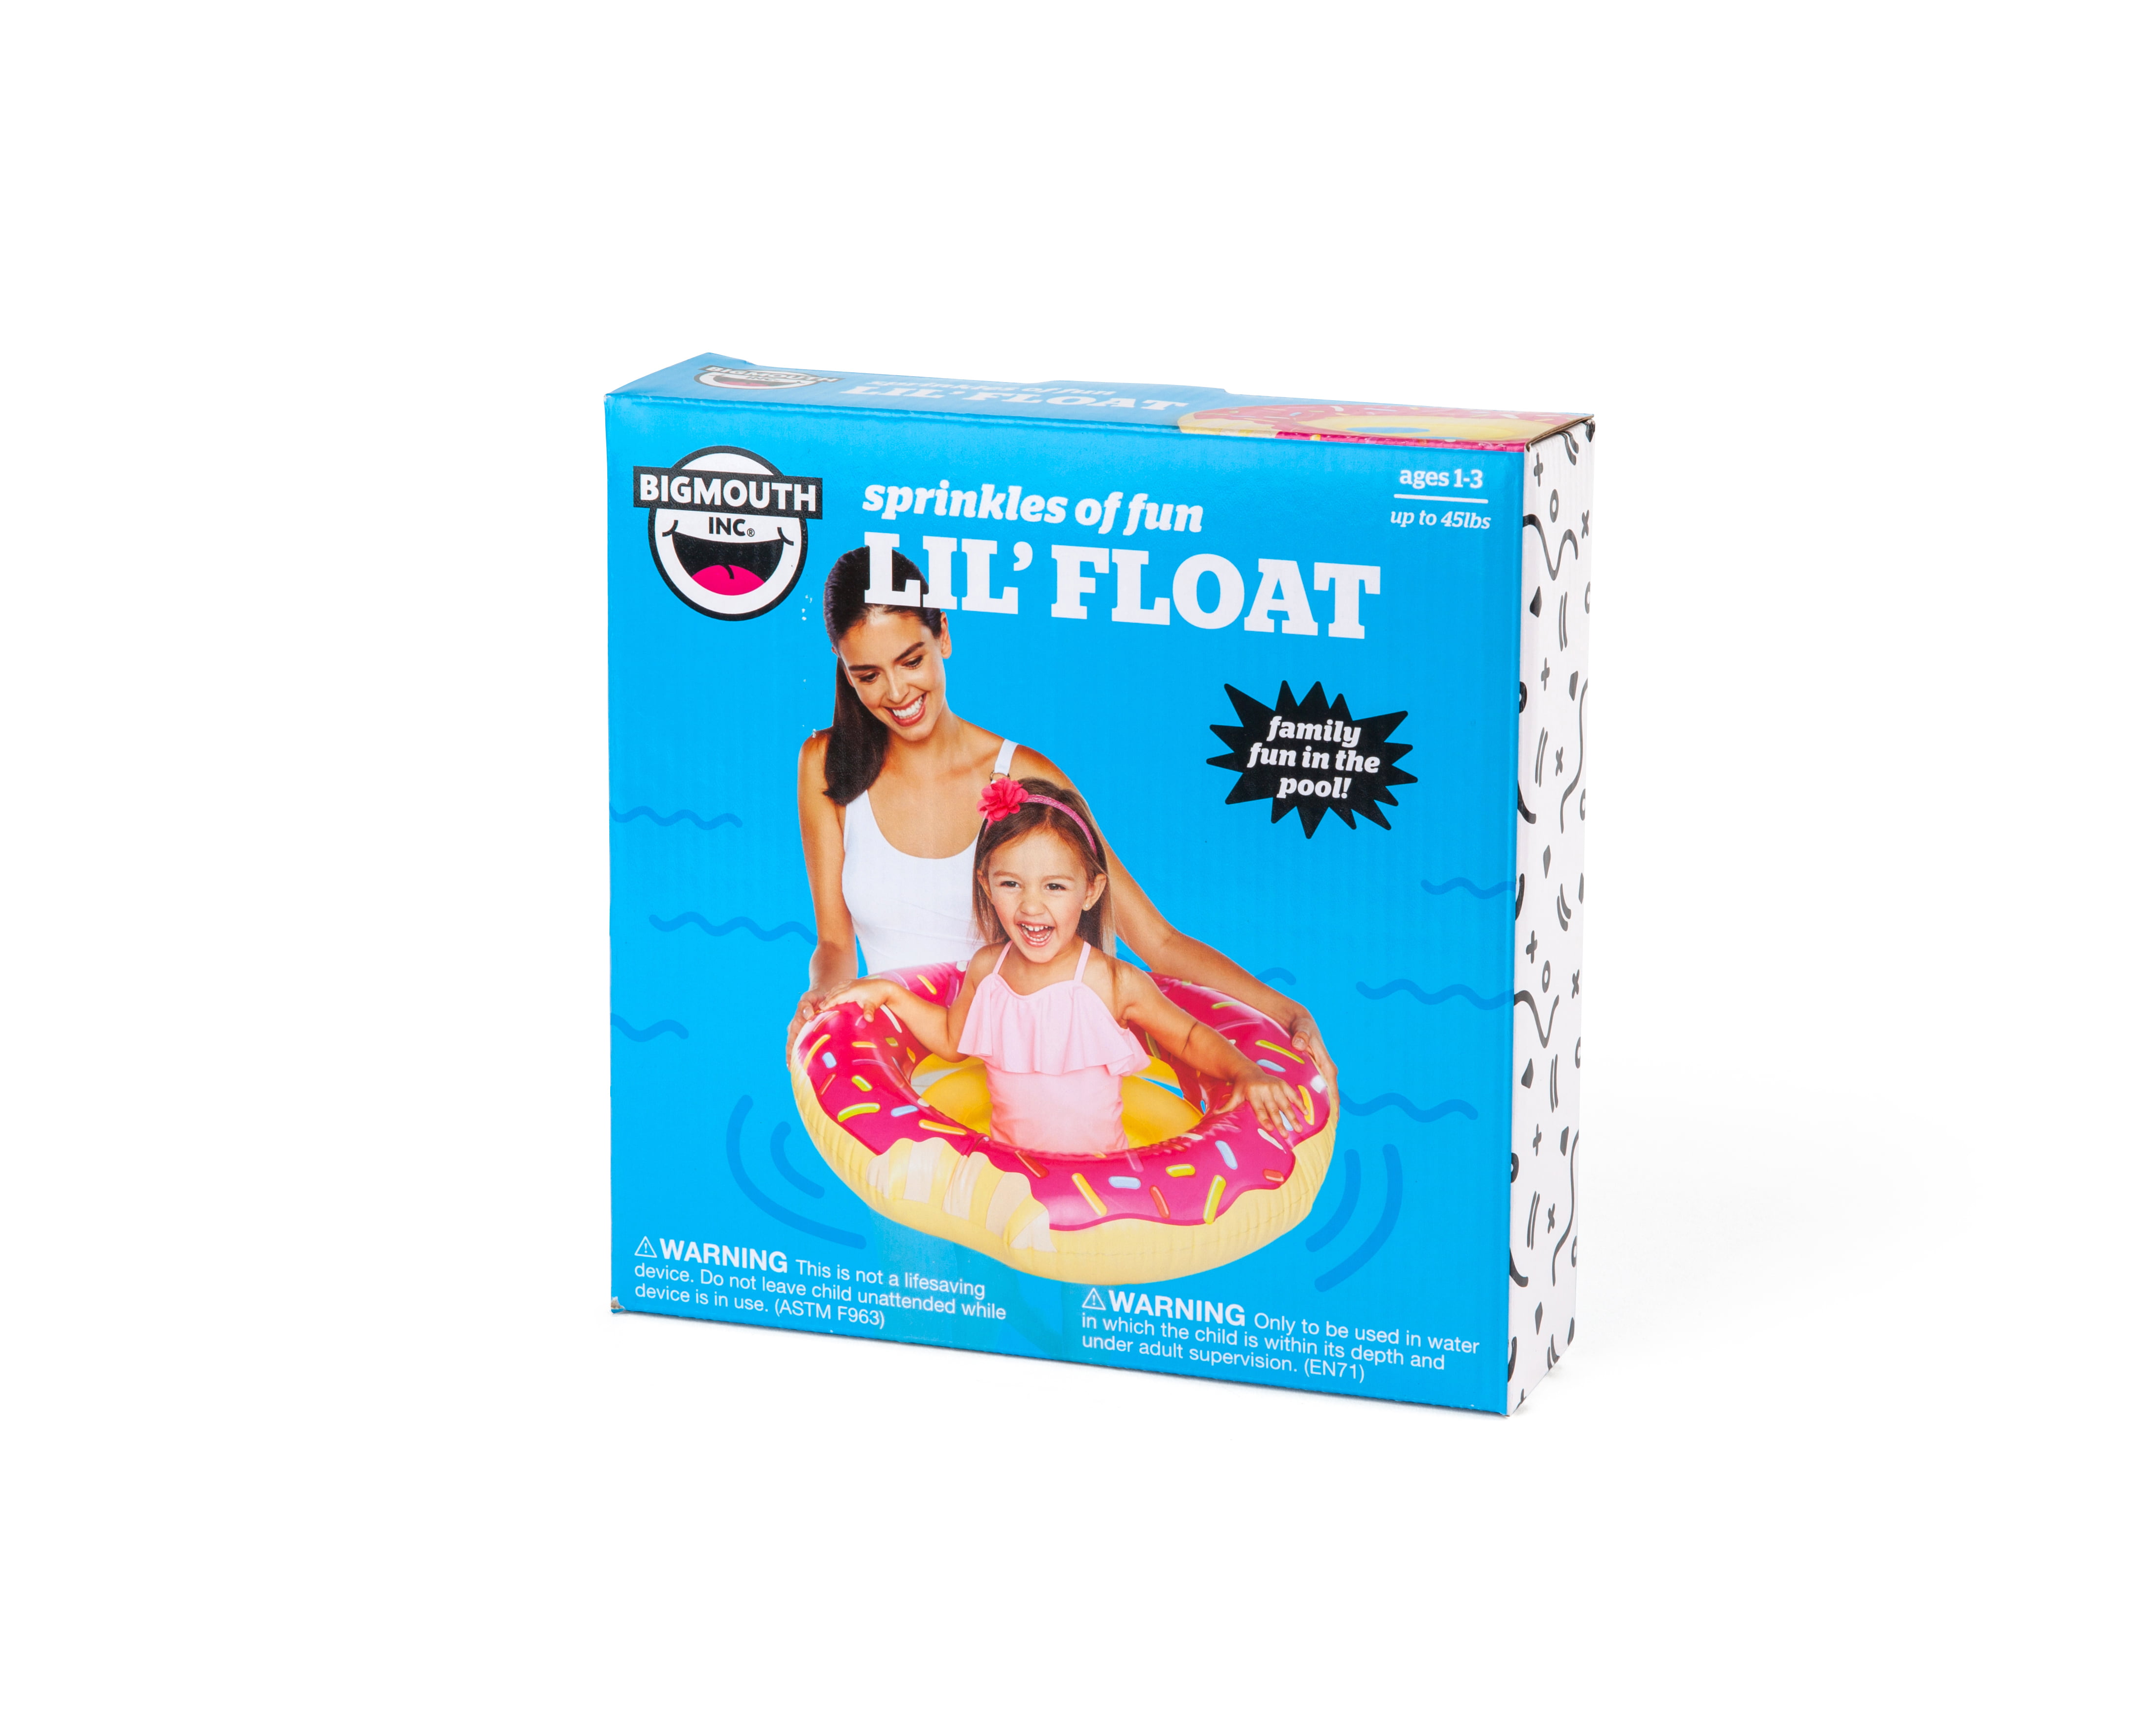 Easy to Inflate and Durable Perfect for Beginner Swimmers BigMouth Inc Sprinkles of Fun Pink Donut Lil Water Float Pool Float for Infants and Kids Ages 1-3 